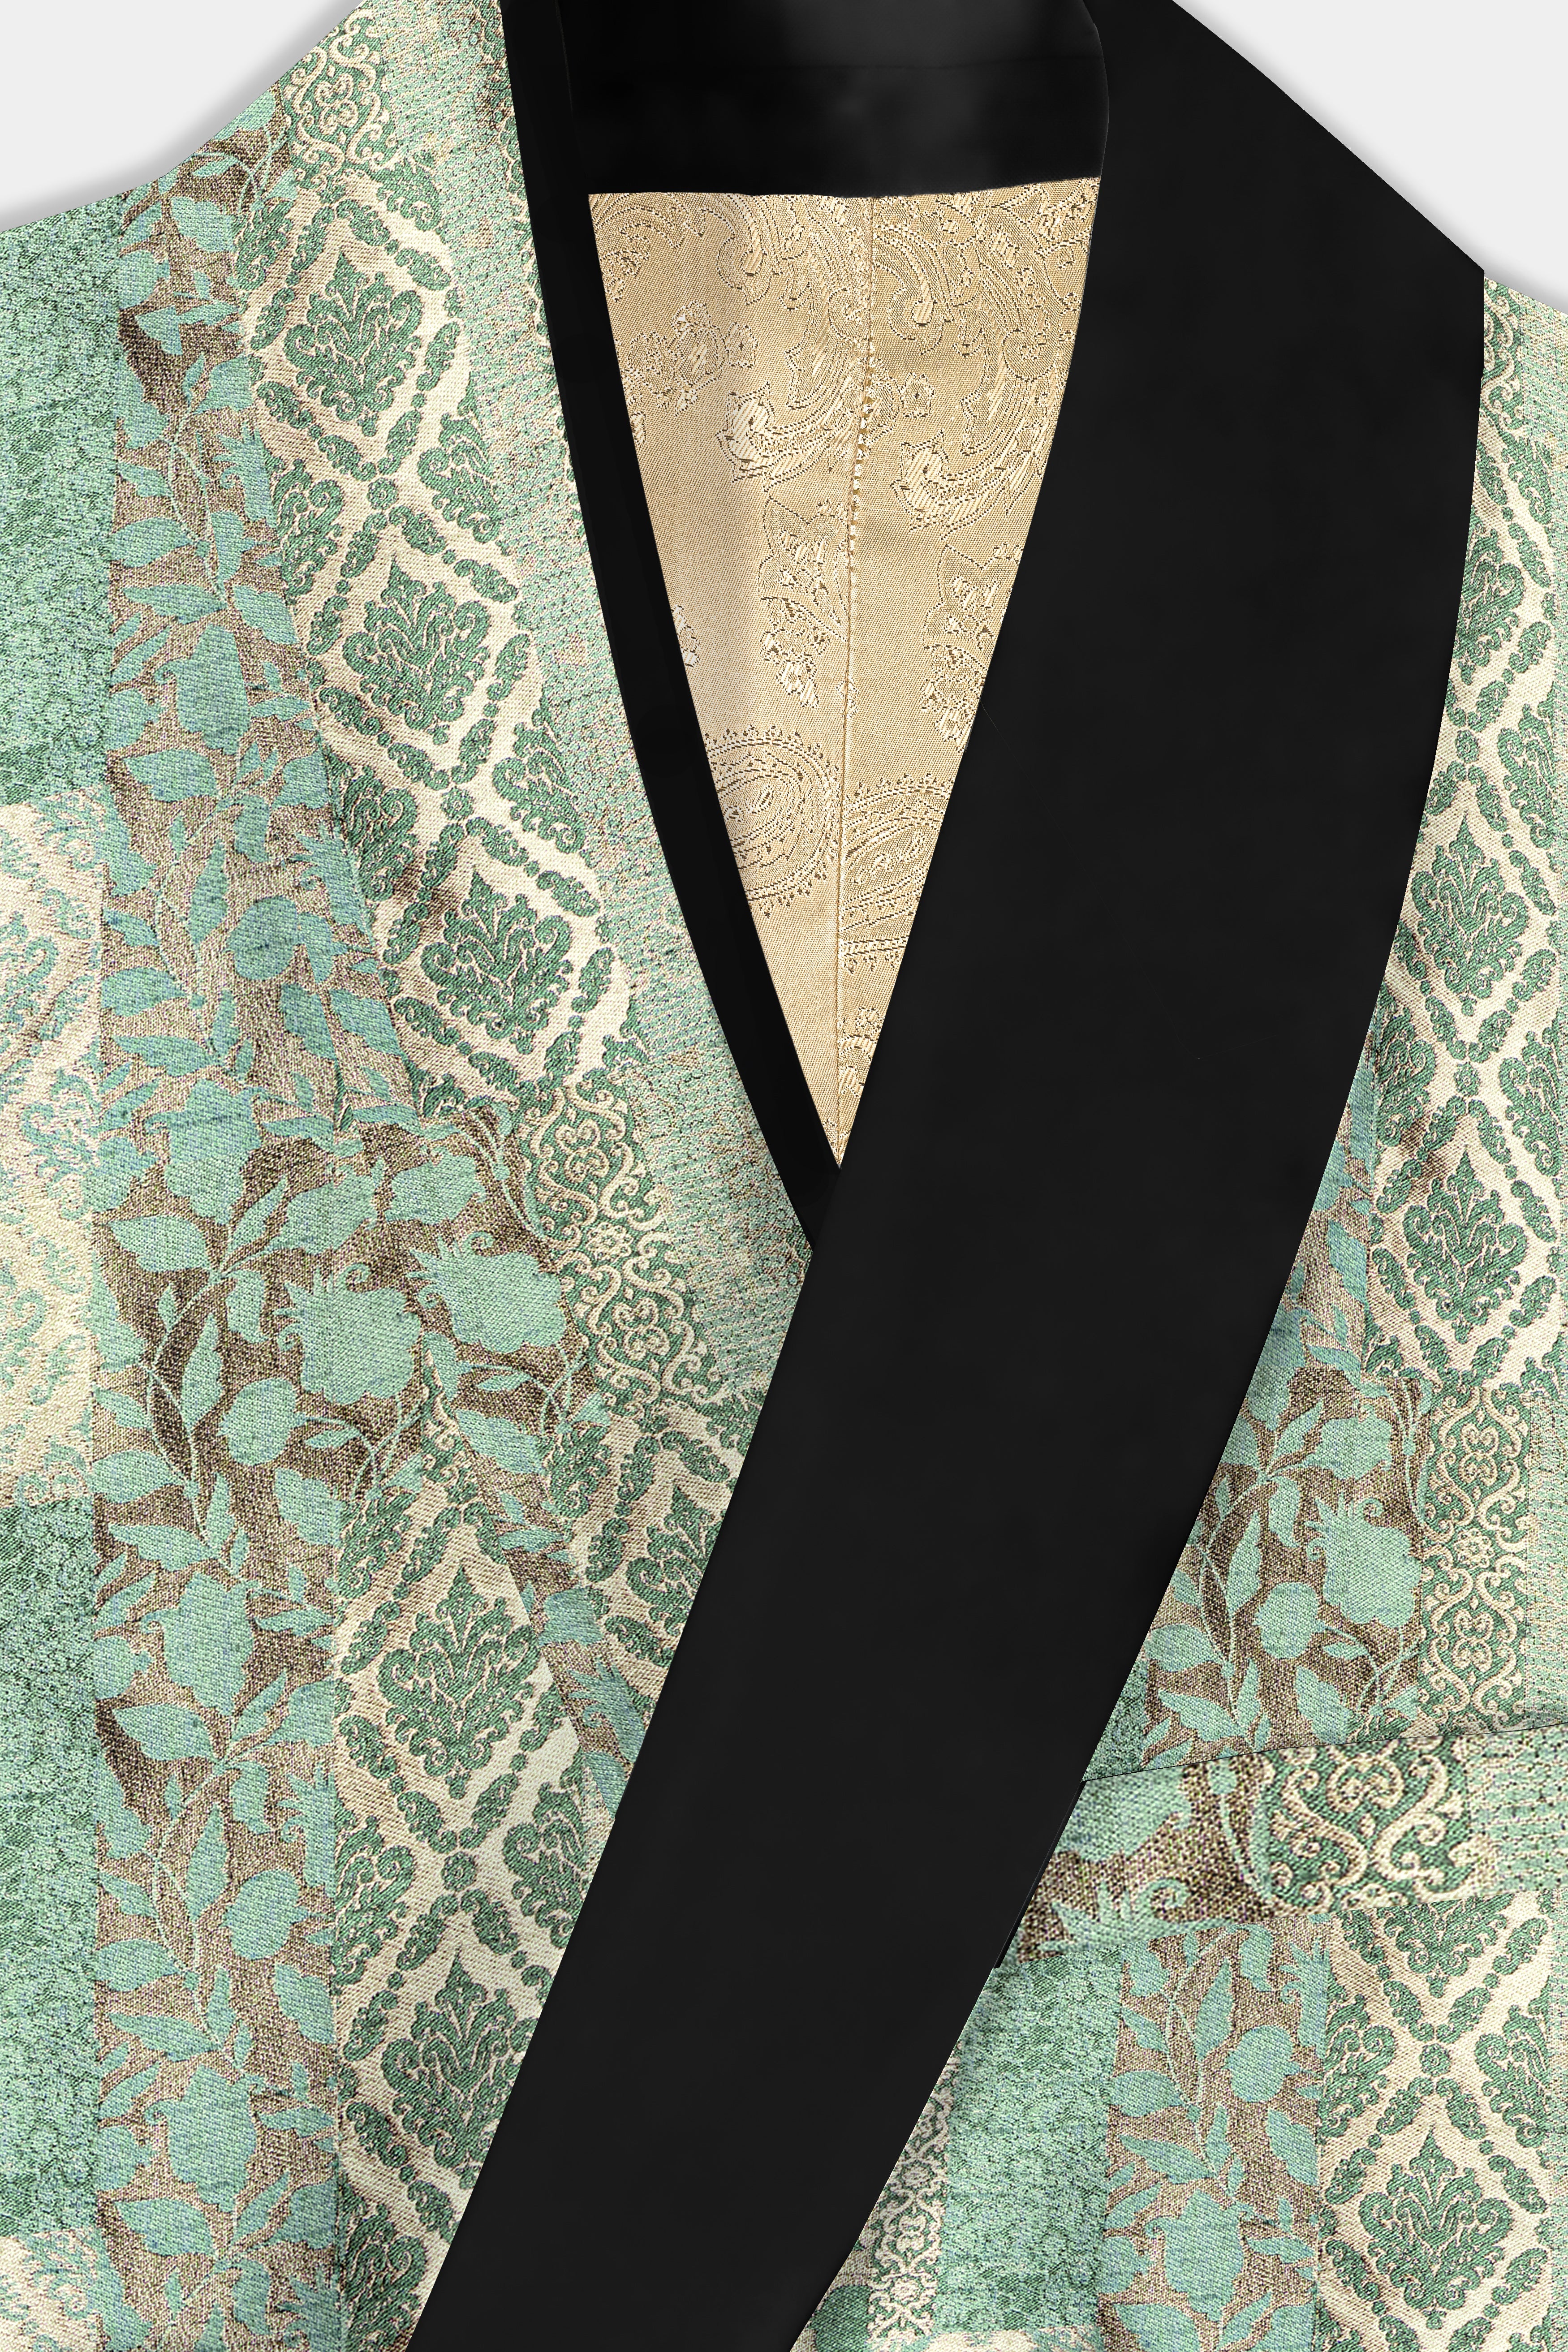 Envy Green and Opium Brown Jacquard Weave Tuxedo Blazer BL3697-BKL-36, BL3697-BKL-38, BL3697-BKL-40, BL3697-BKL-42, BL3697-BKL-44, BL3697-BKL-46, BL3697-BKL-48, BL3697-BKL-50, BL3697-BKL-52, BL3697-BKL-54, BL3697-BKL-56, BL3697-BKL-58, BL3697-BKL-60